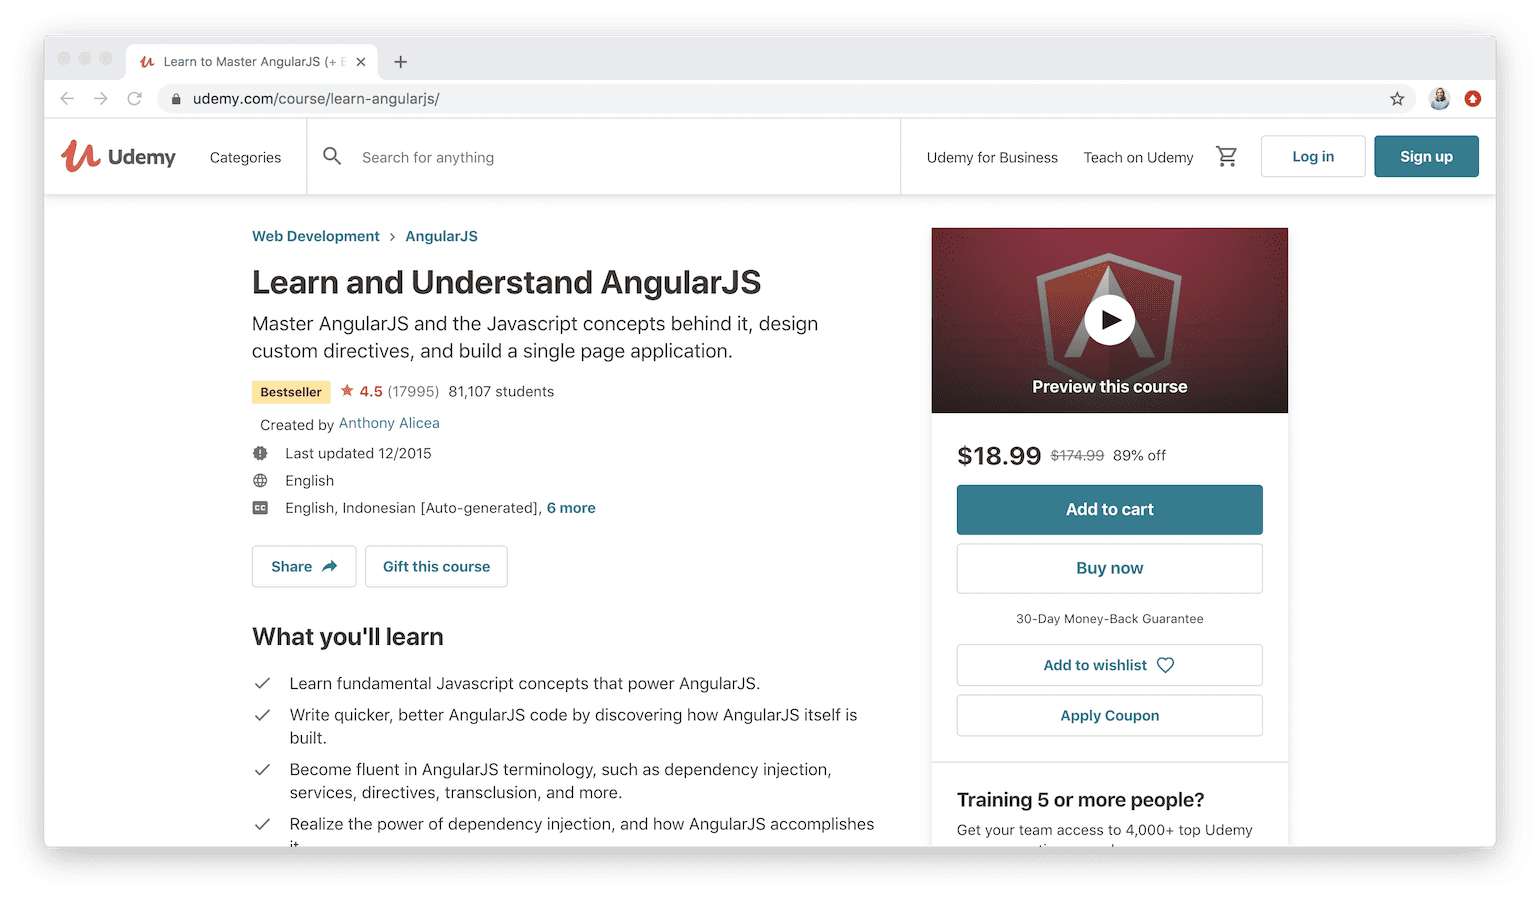 Learn and Understand AngularJS on Udemy